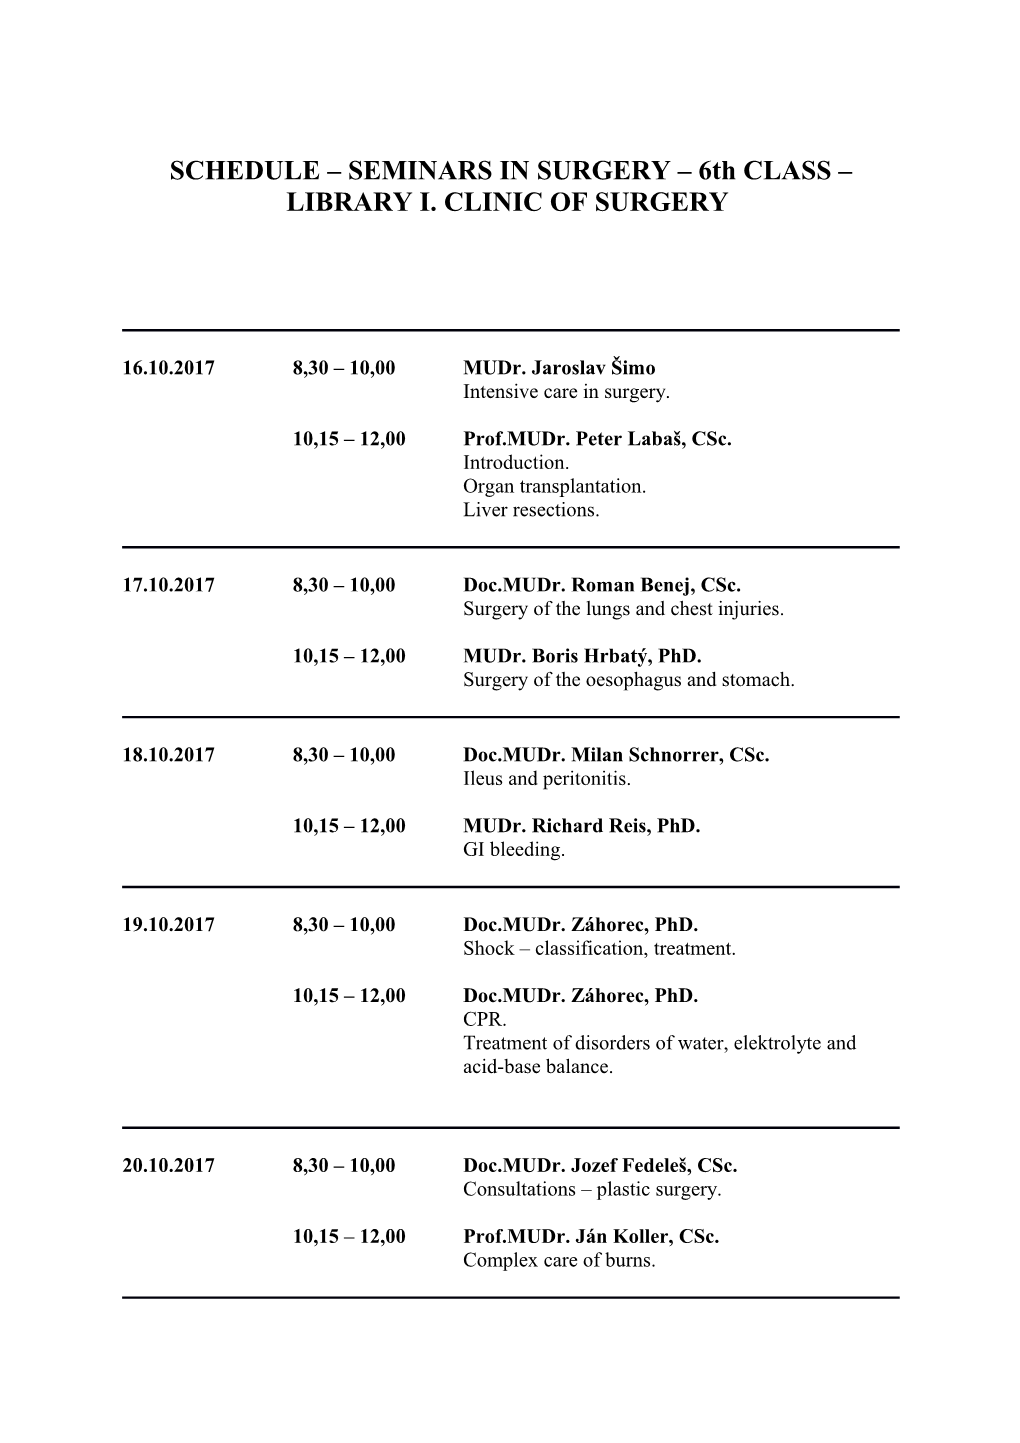 SCHEDULE SEMINARS in SURGERY 6Th CLASS LIBRARY I. CLINIC of SURGERY